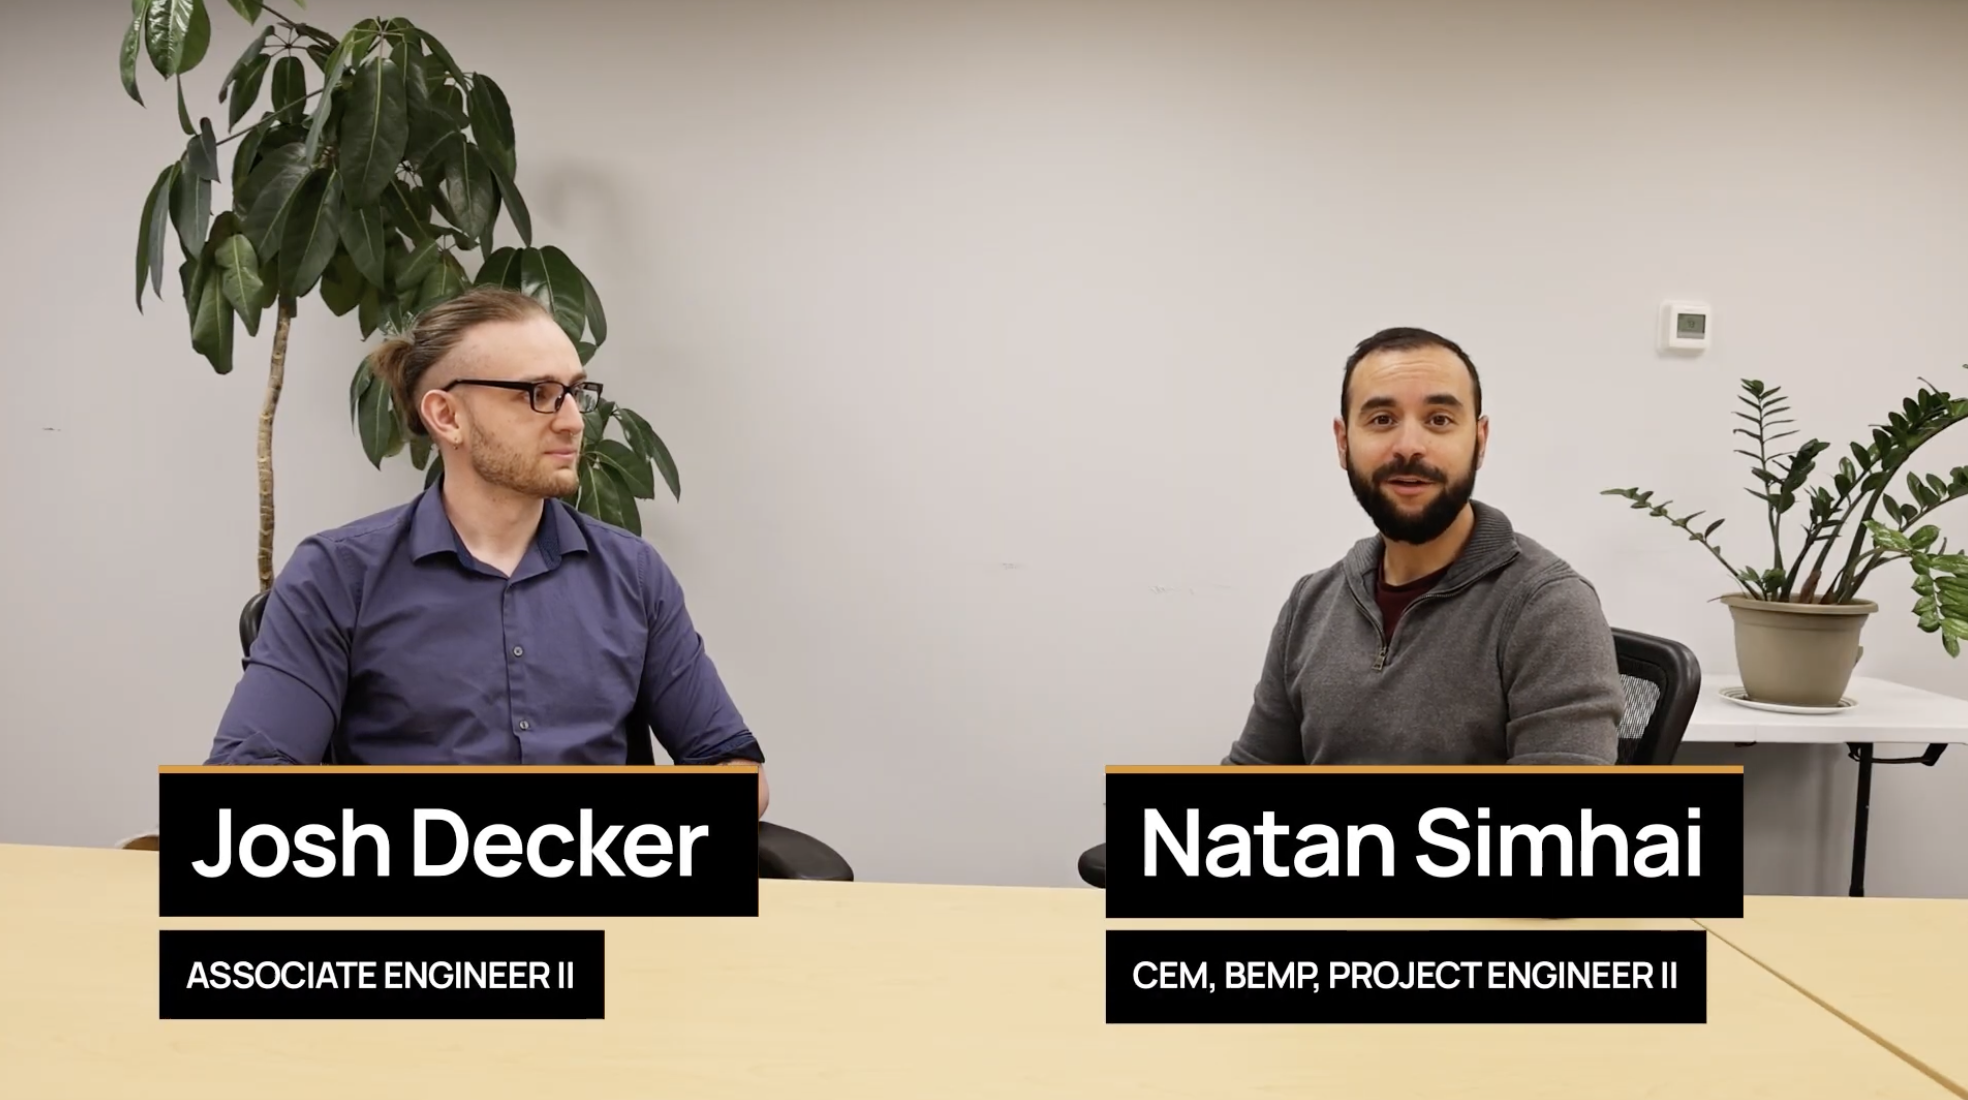 Watch the video with our Energy Engineer and Project Manager, Natan Simhai and Josh Decker